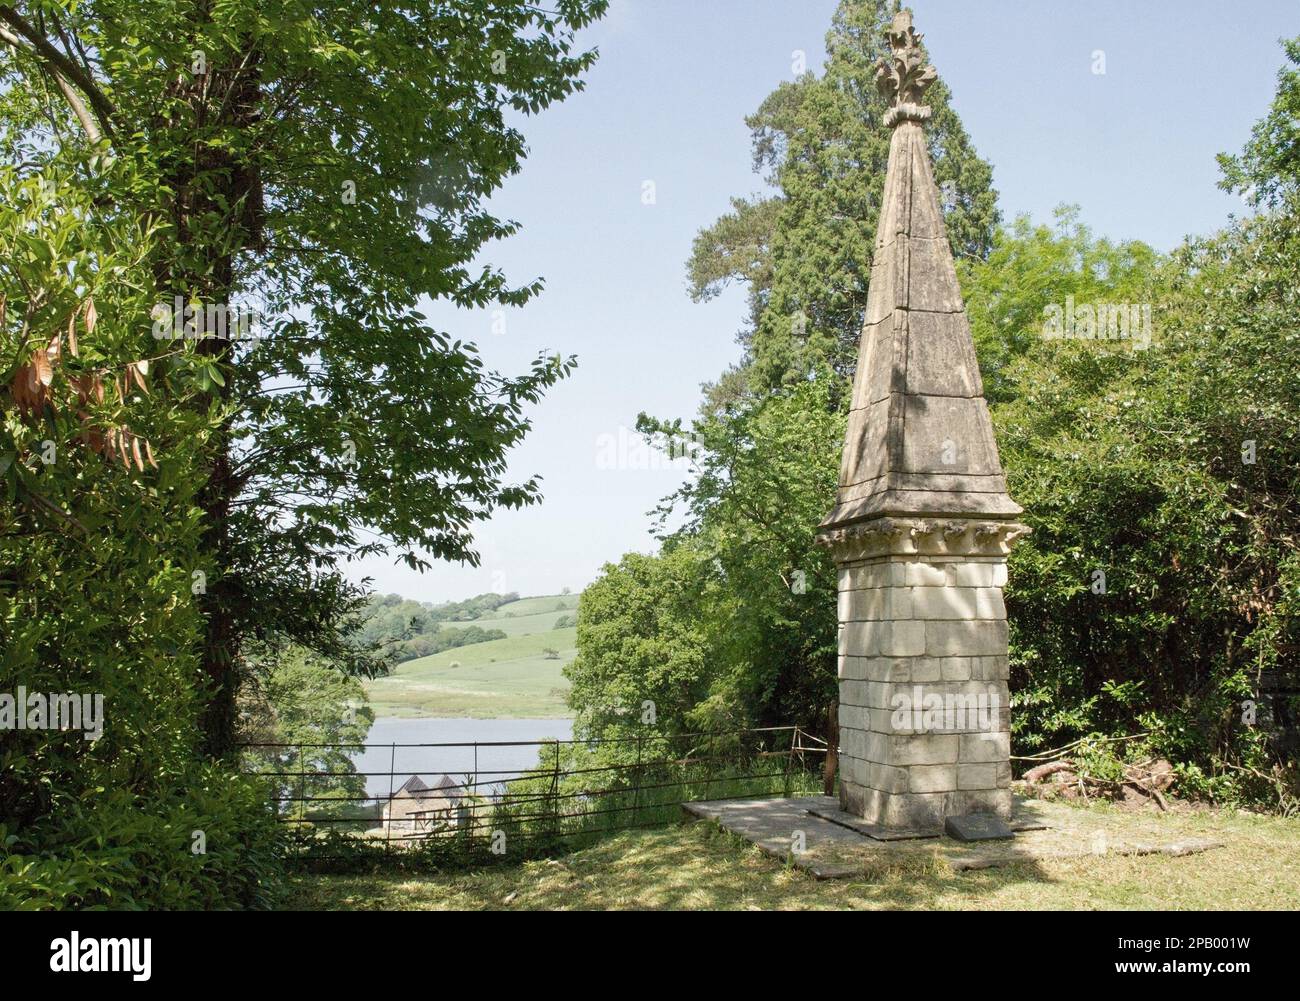 Exterior Obelisk in the grounds of Port Eliot with a vantage point view of the River Tidy, at St Germans in south east Cornwall Stock Photo